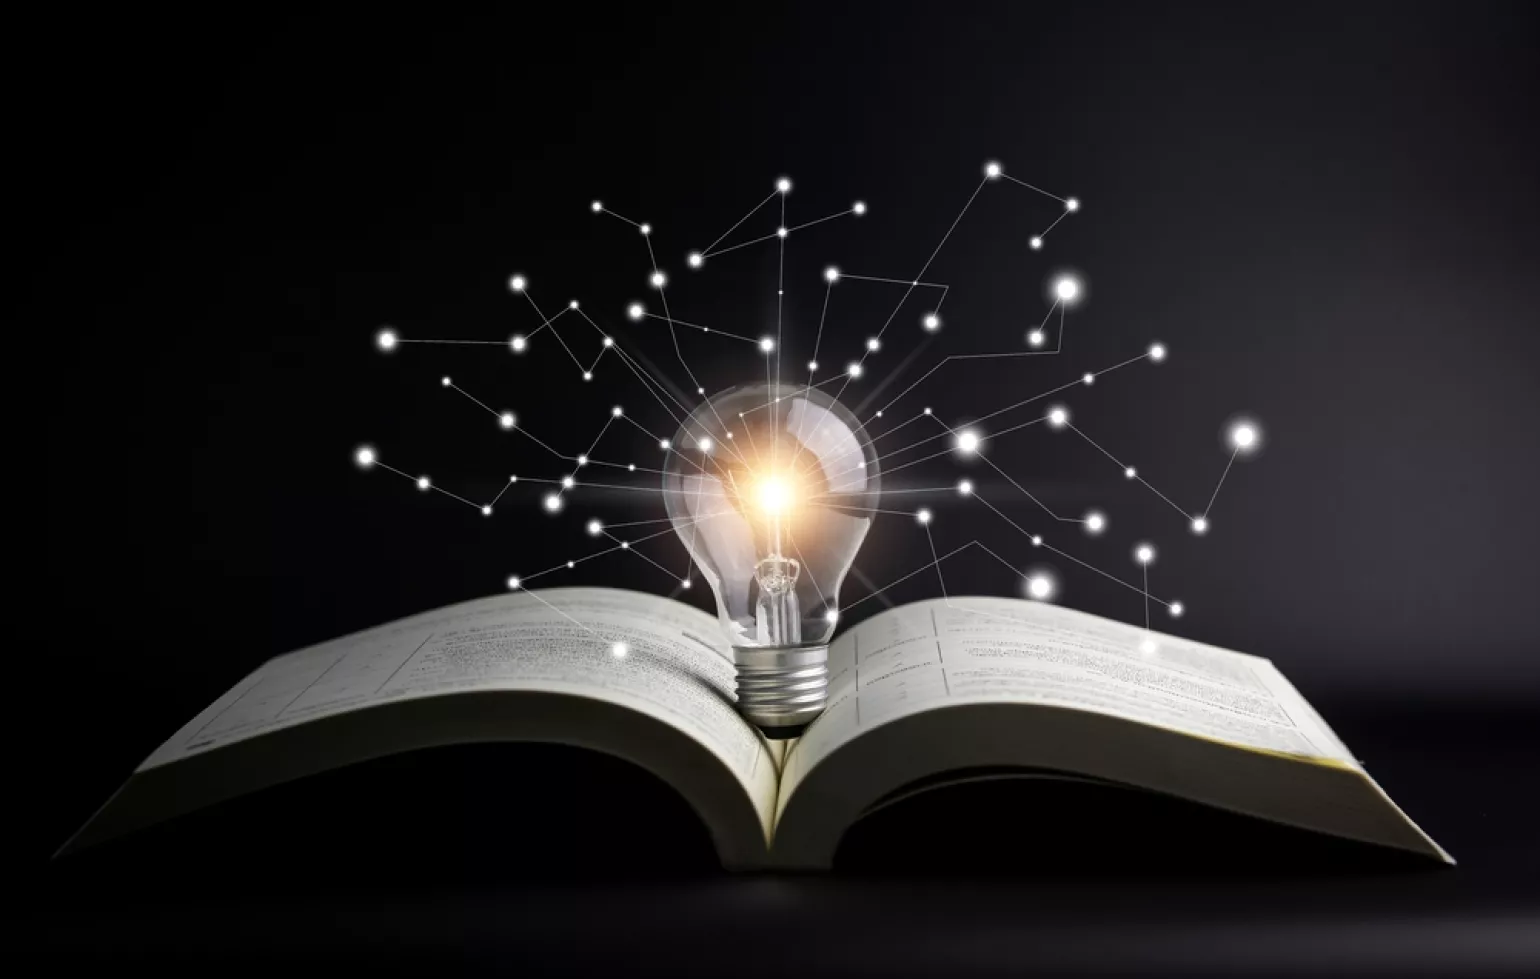 Open book against a black background with a light bulb emerging from the middle connecting to white dots